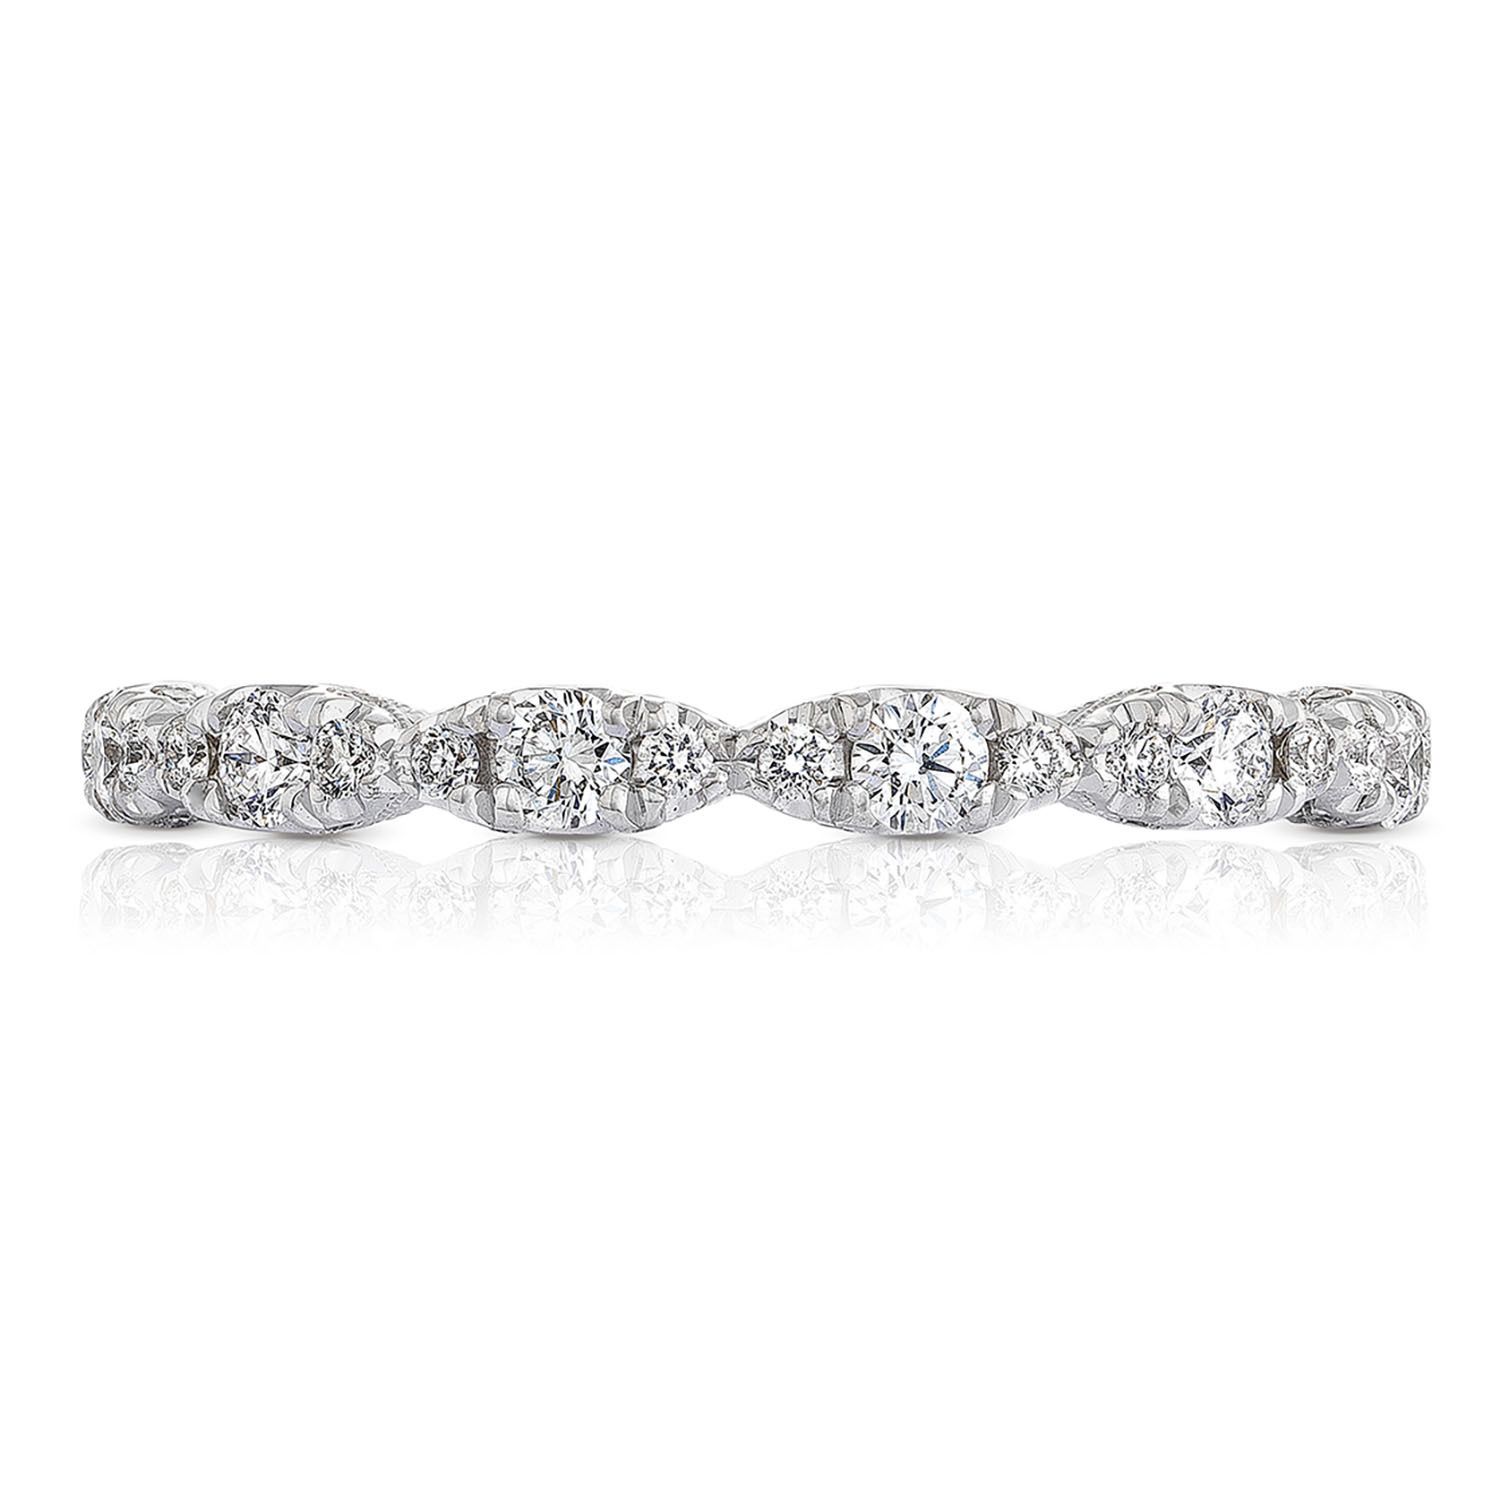 Womens Bands – Wedding Pertaining To Most Recent Diamond Layered Anniversary Bands In White Gold (View 15 of 20)